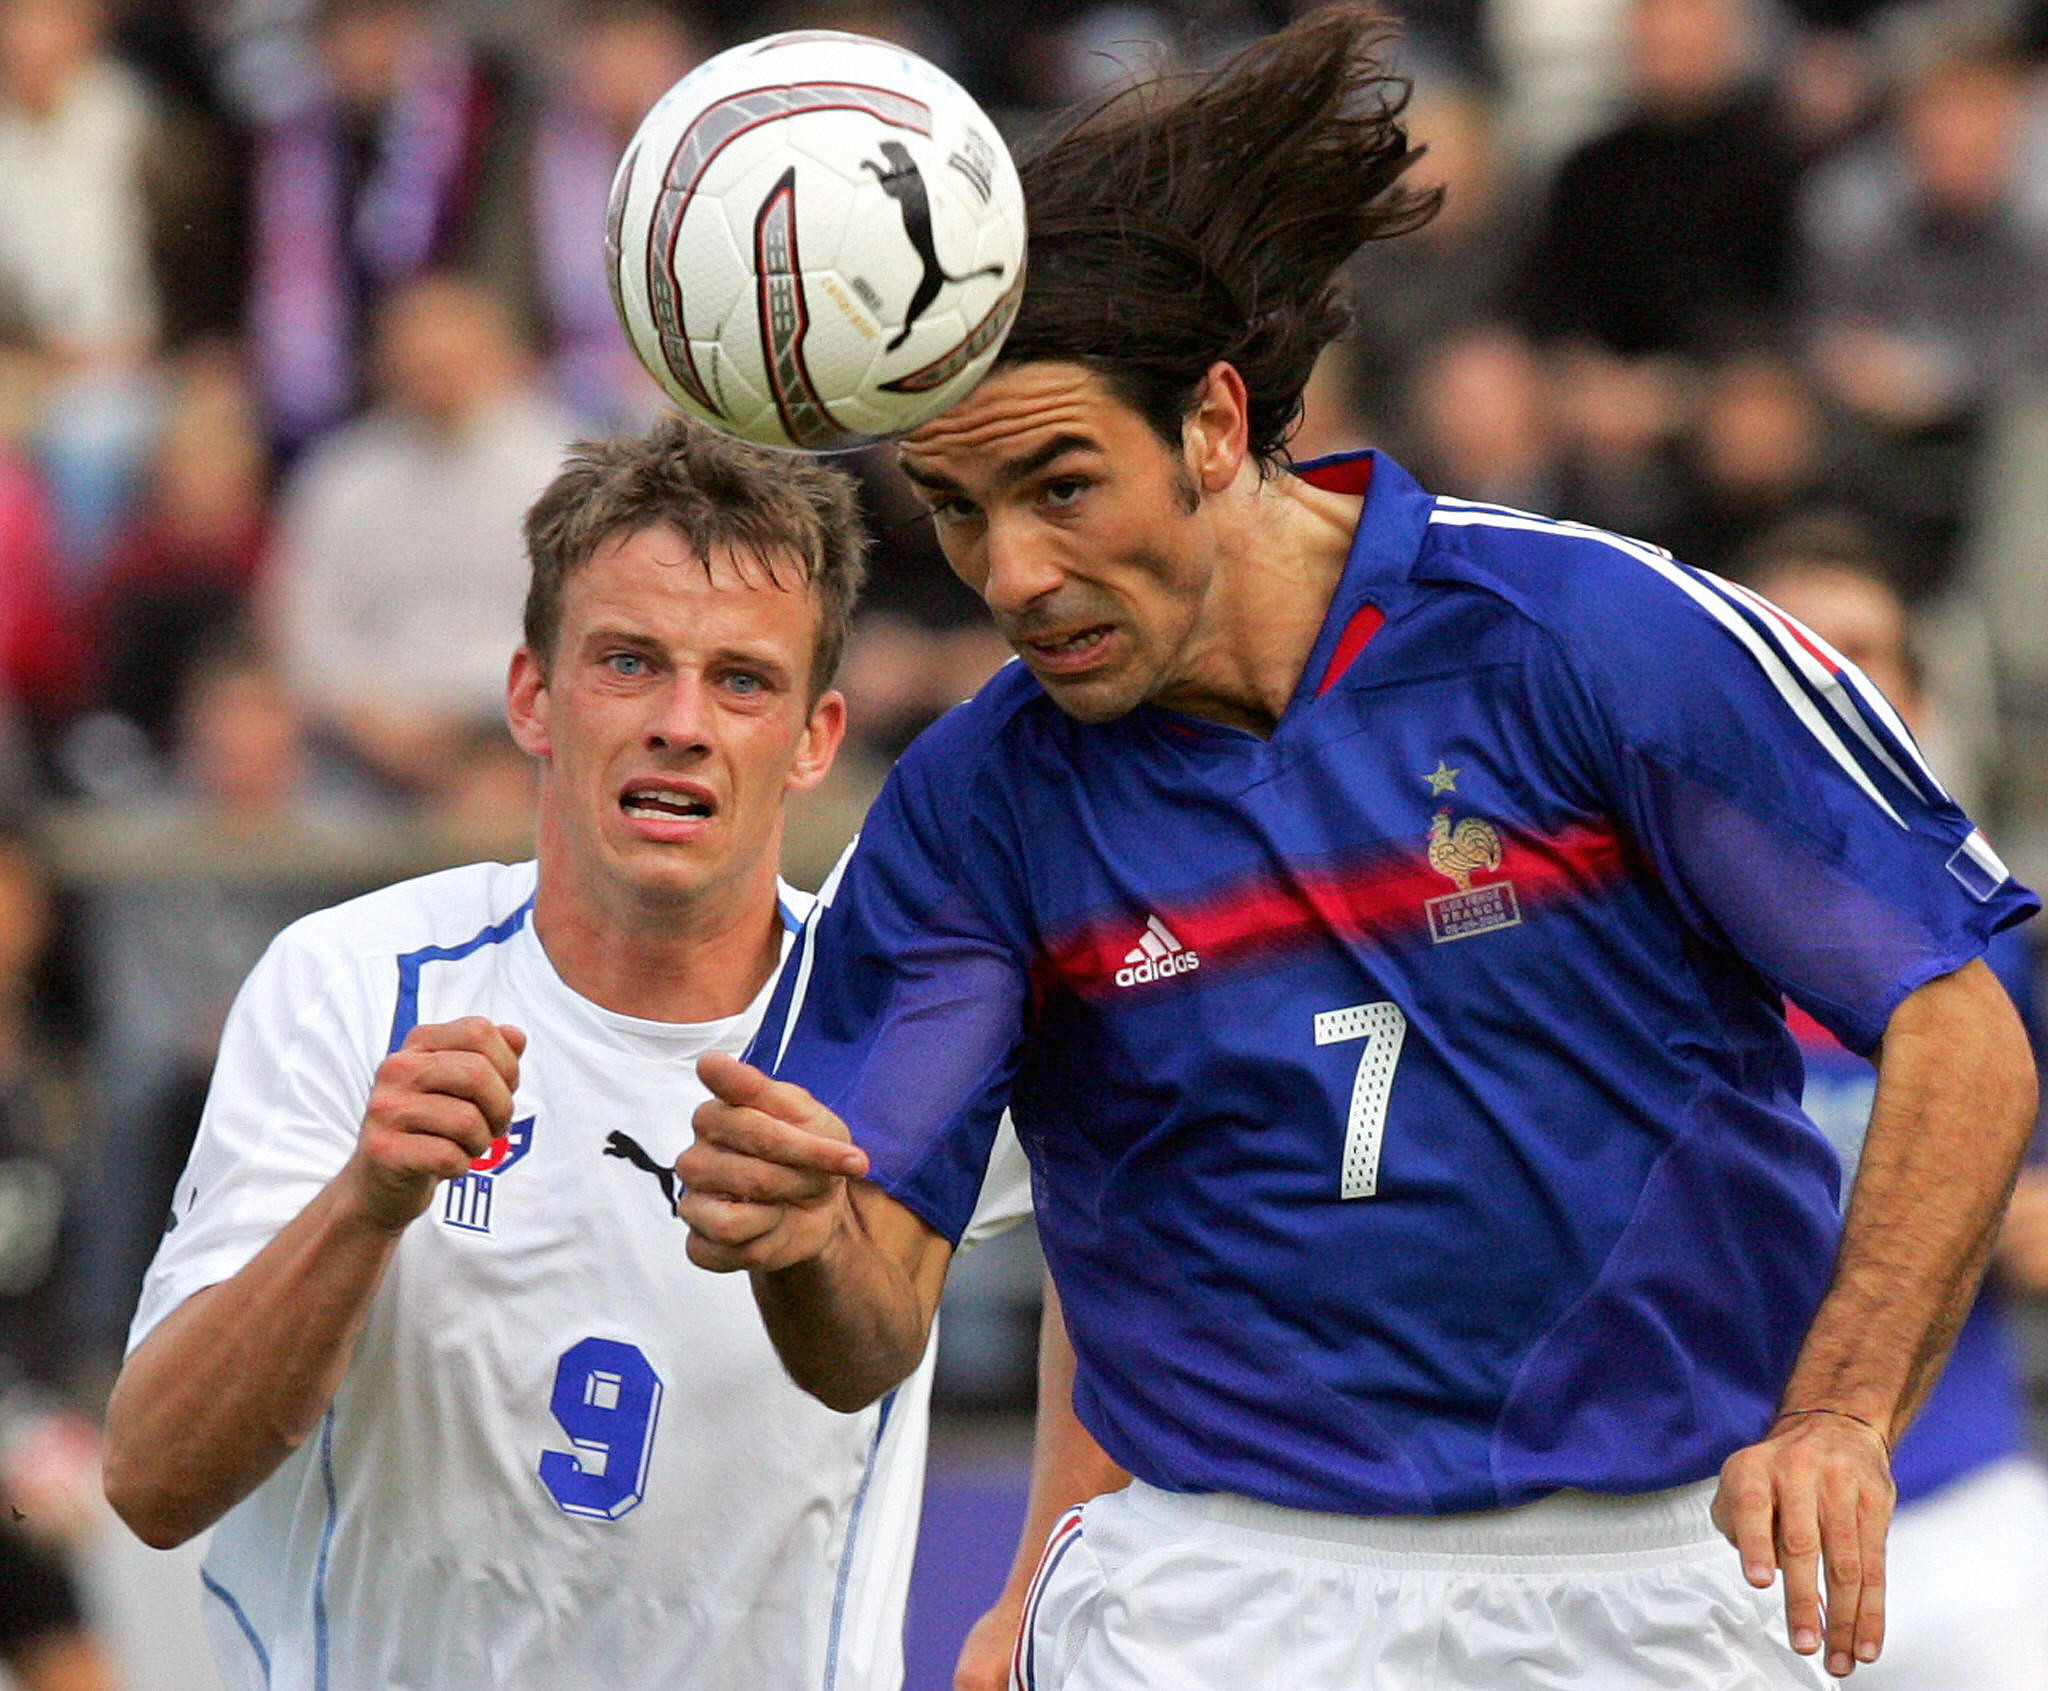 Robert Pires, right, won football's World Cup and European Championships playing for France ©Getty Images